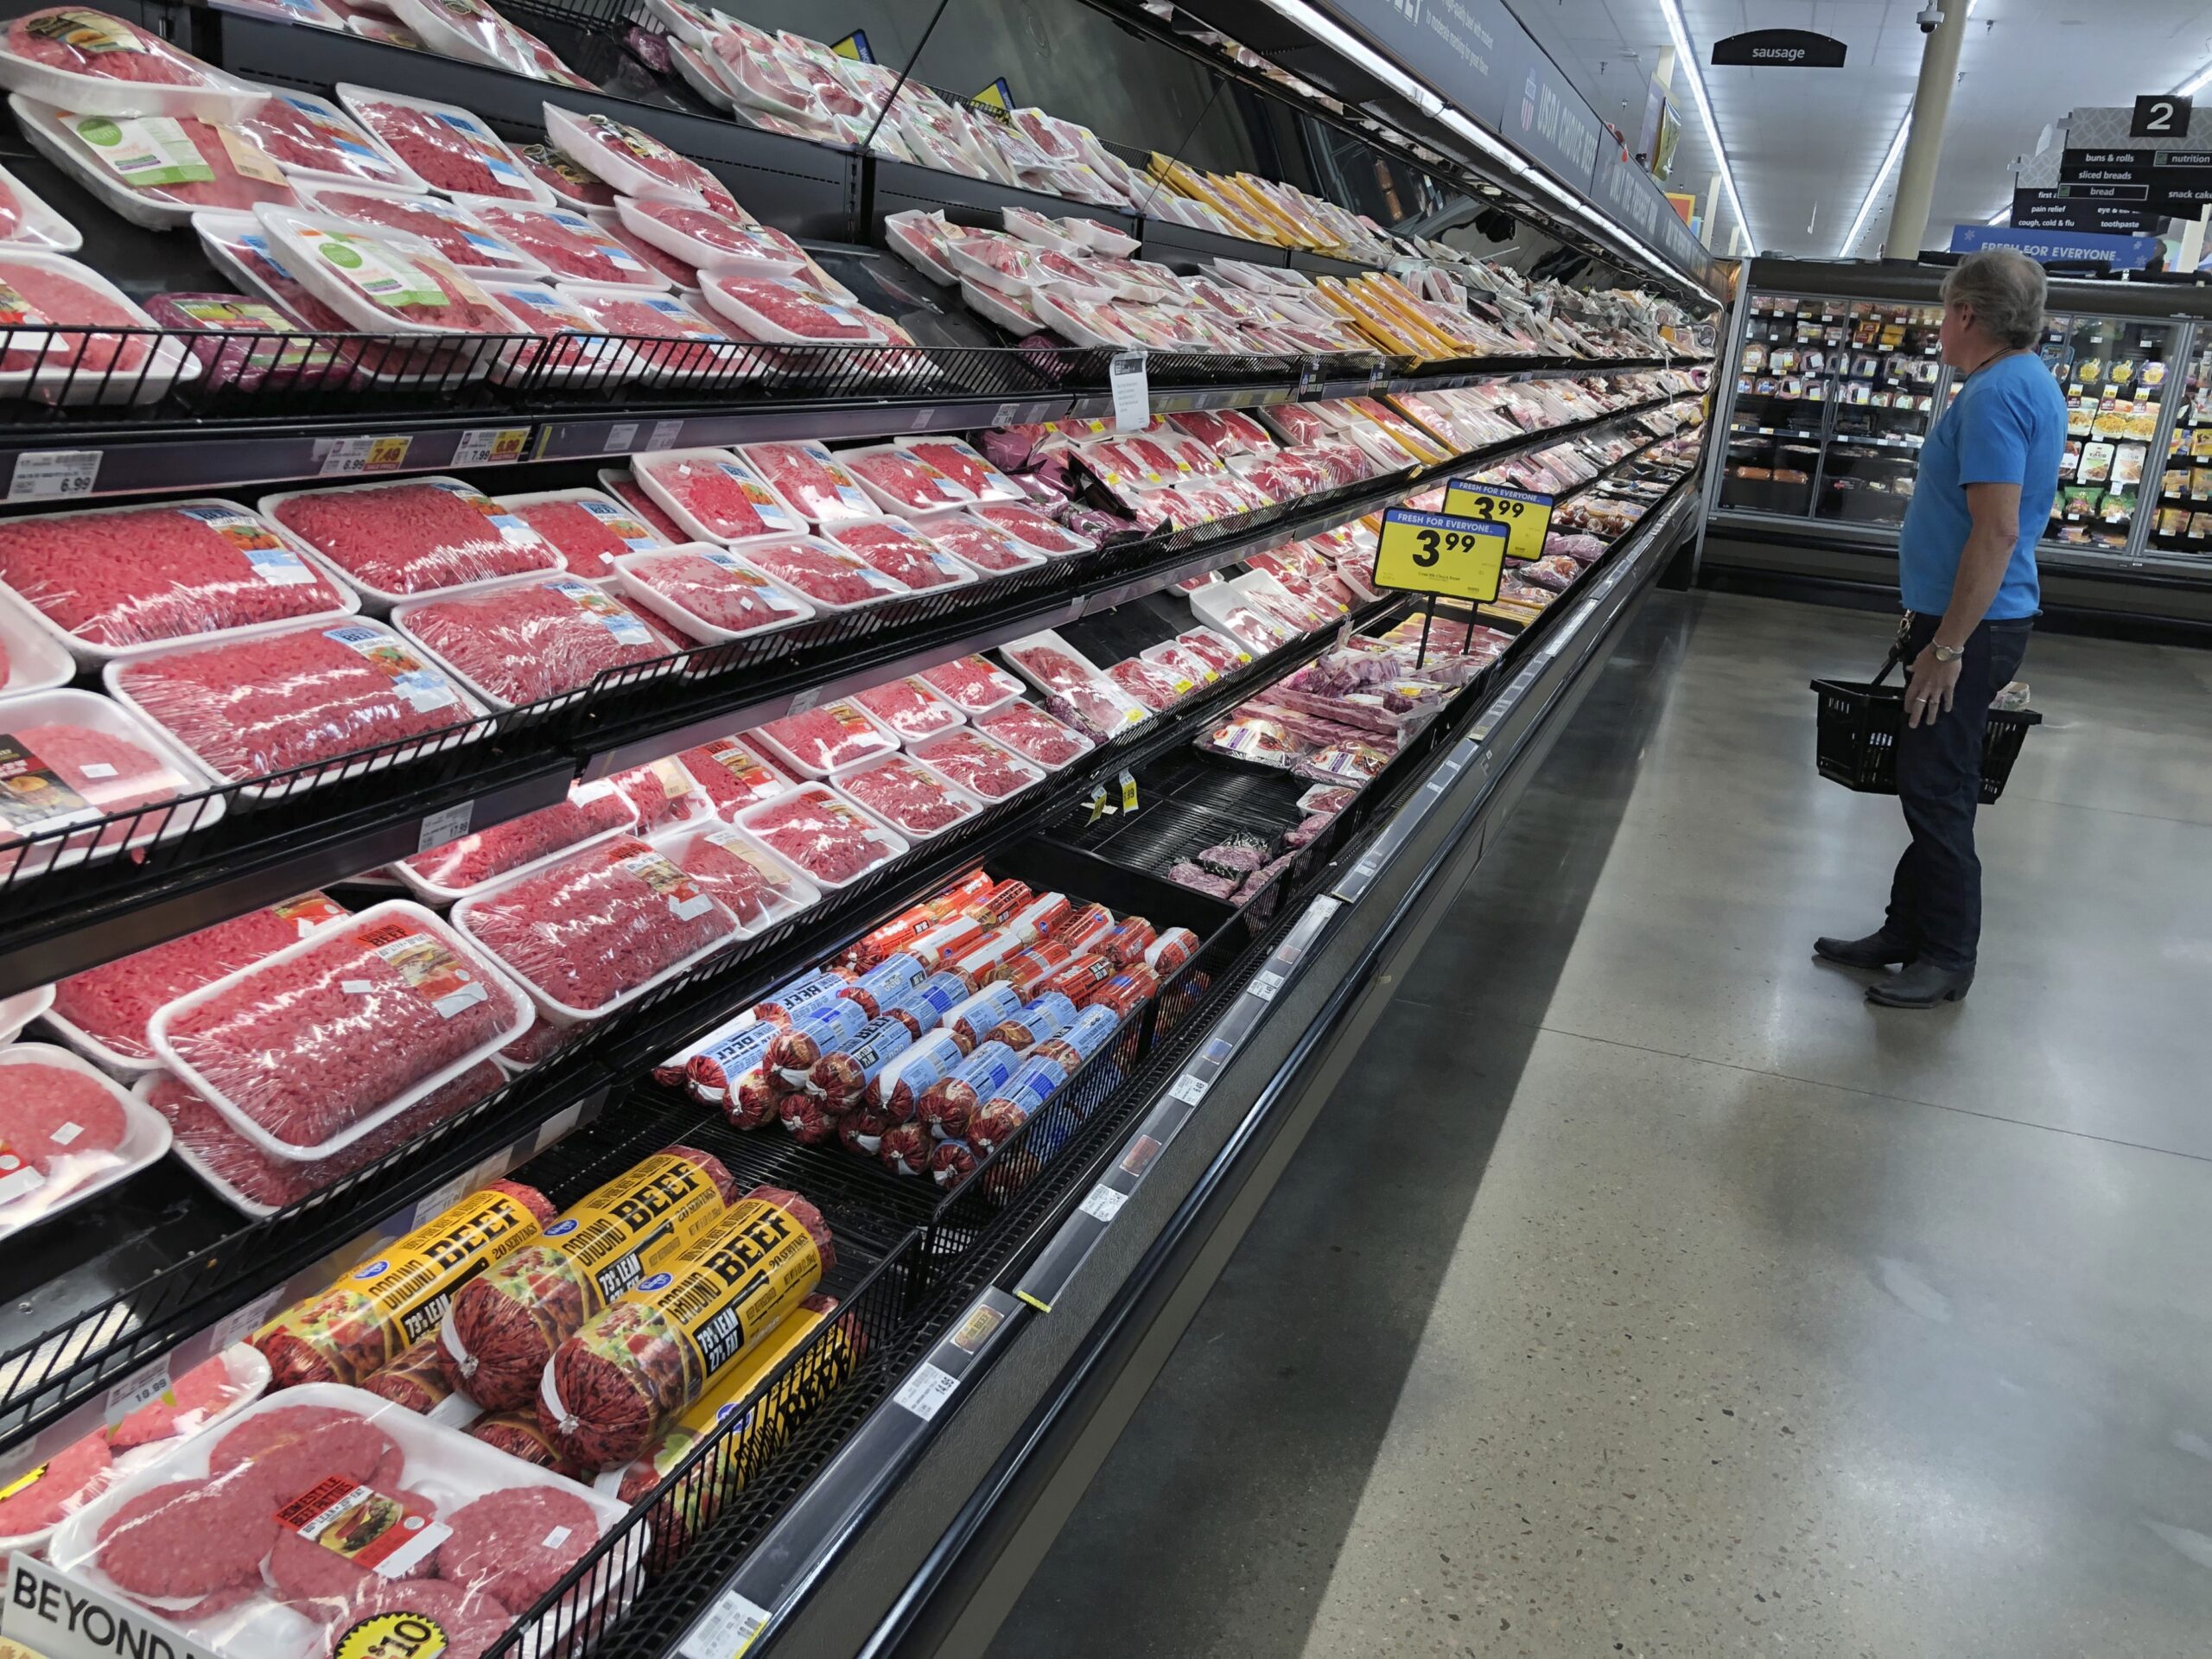 A shopper surveys the overflowing selection of packaged meat in a grocery store